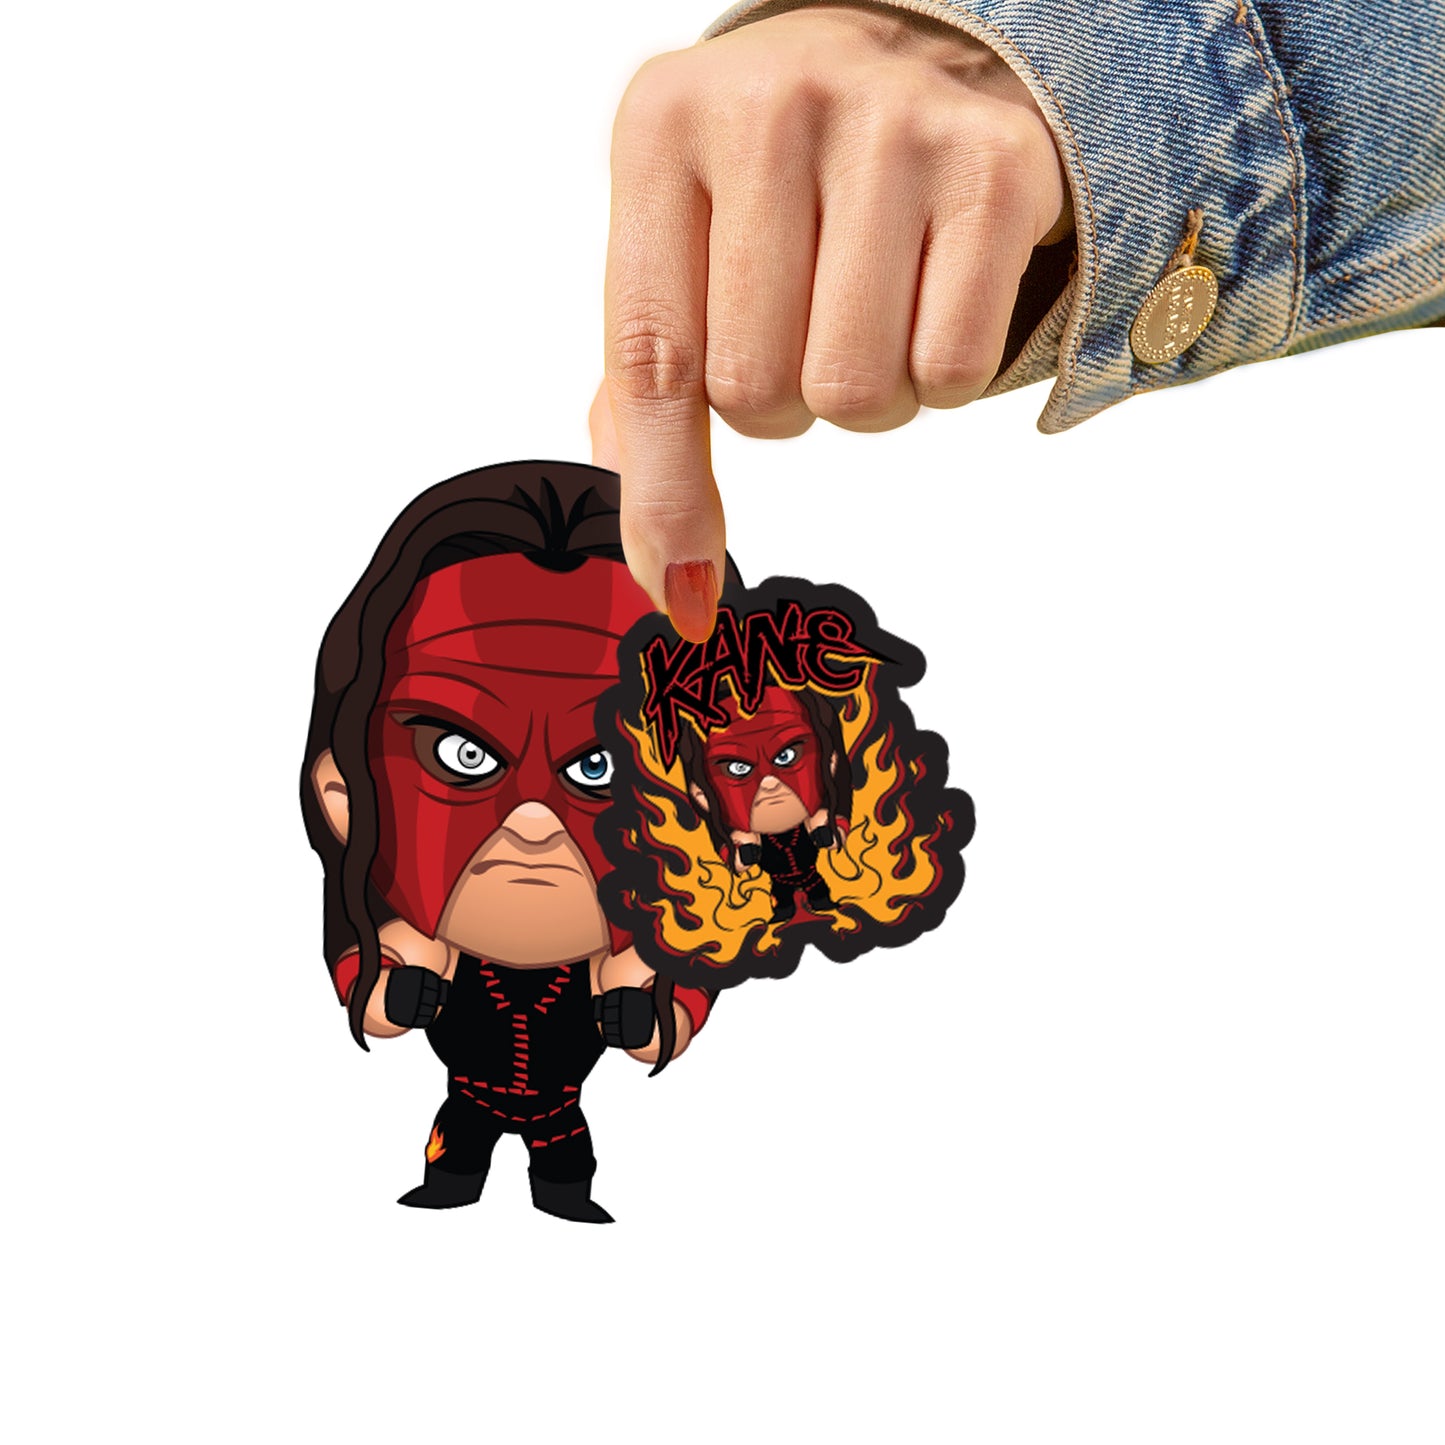 Sheet of 5 -Kane Minis - Officially Licensed WWE Removable Adhesive Decal